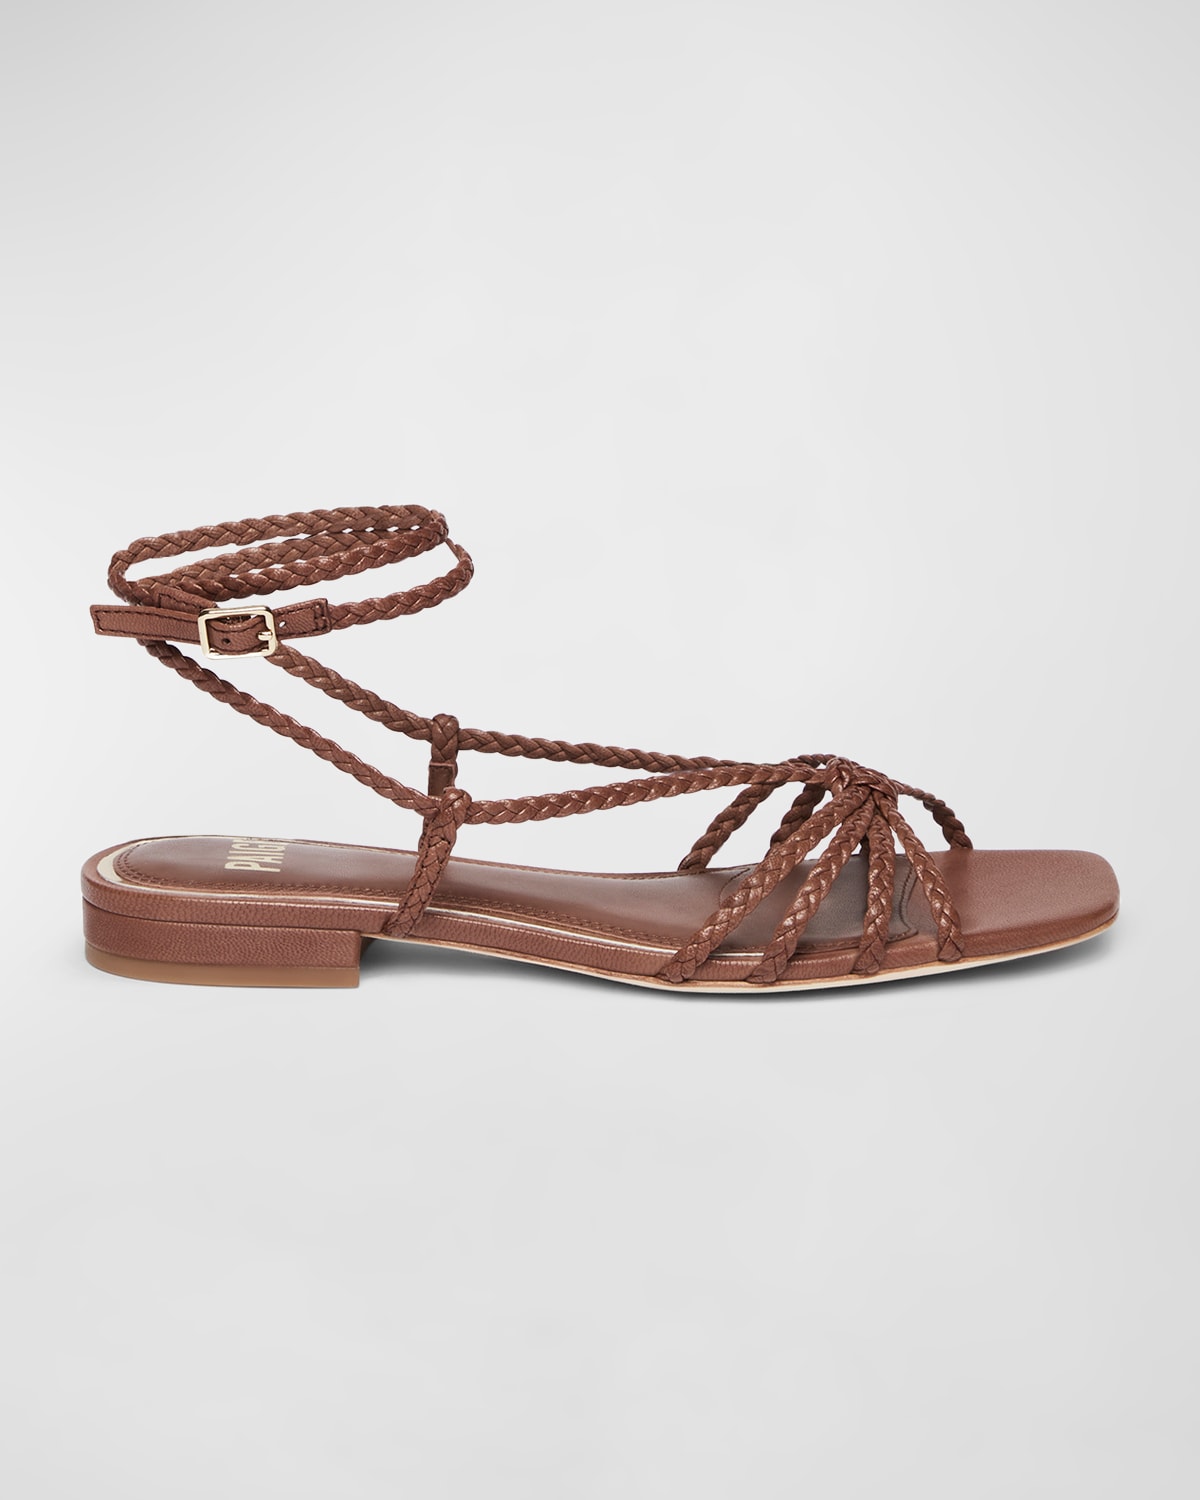 PAIGE DEANNA BRAIDED ANKLE-STRAP FLAT SANDALS